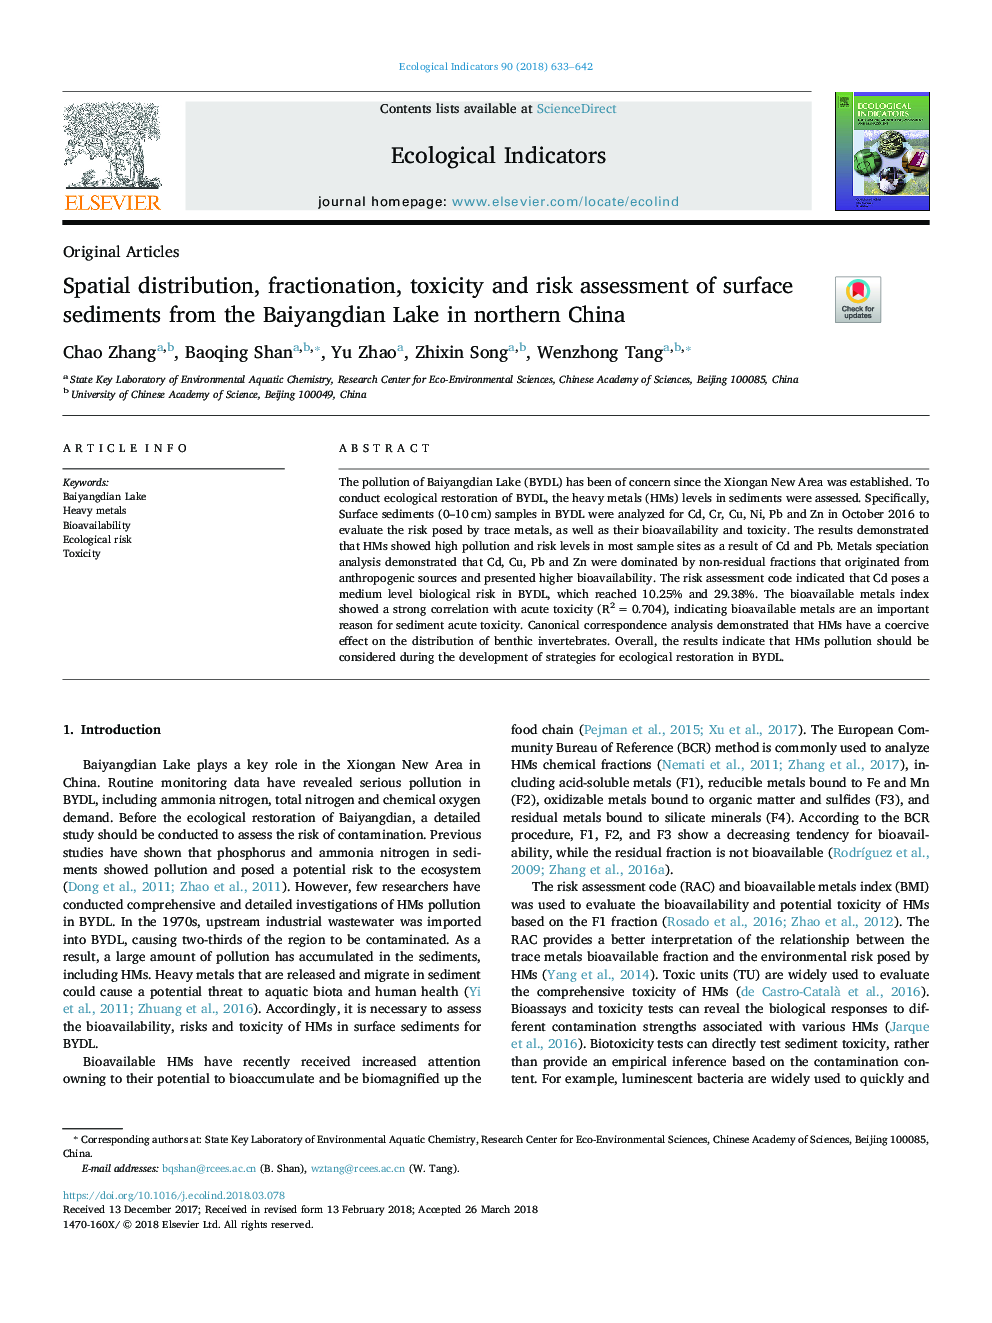 Spatial distribution, fractionation, toxicity and risk assessment of surface sediments from the Baiyangdian Lake in northern China